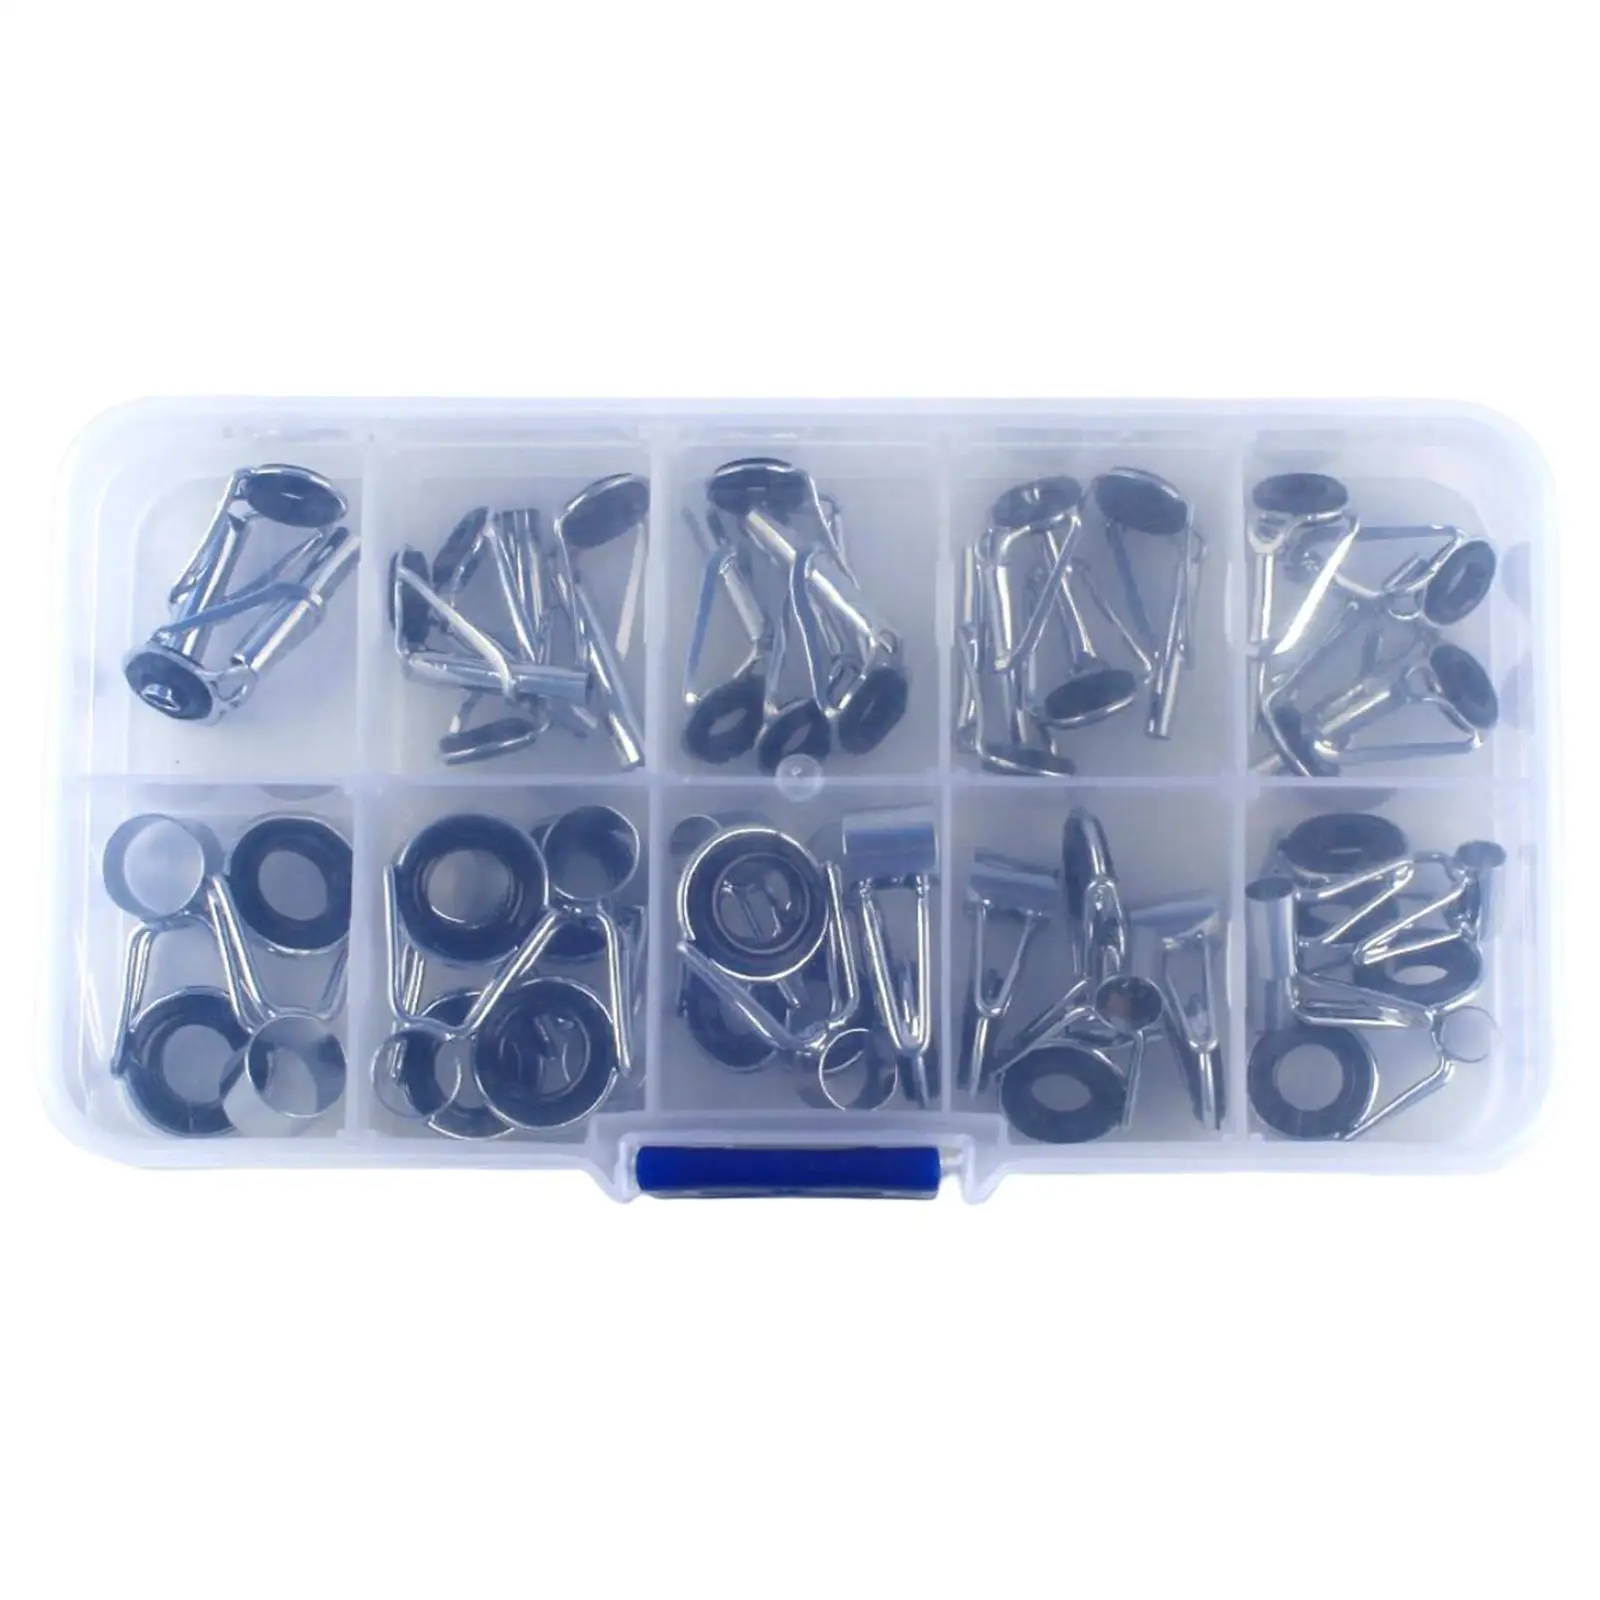 36 Pieces Fishing Rod Tips Guides Repair Kit Mixed Size in A Box Replacement